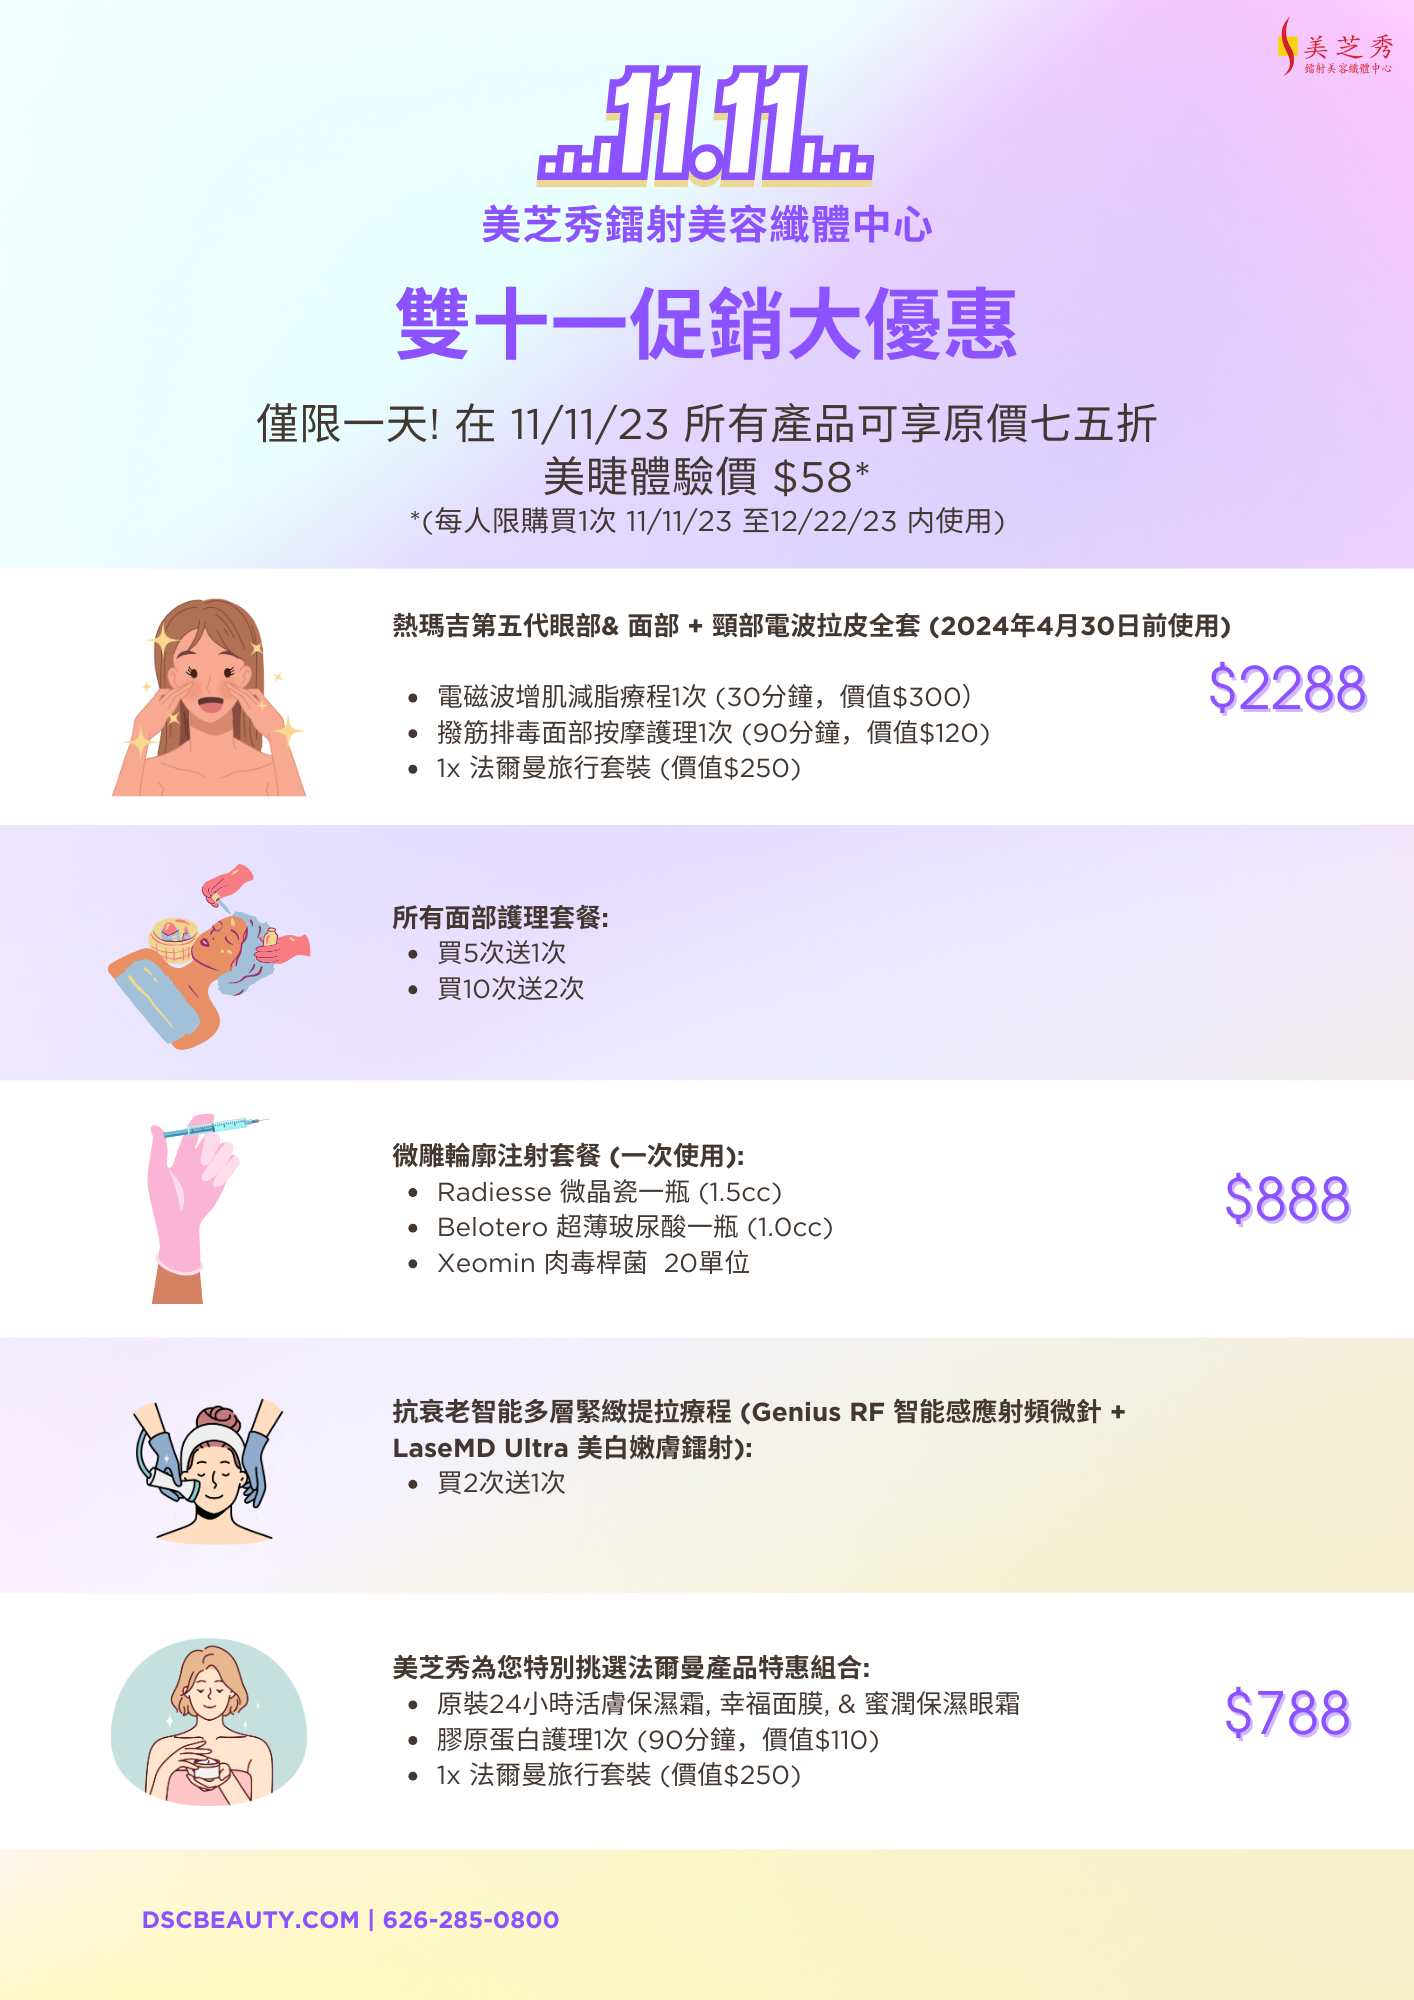 DSC 11/11 2023 Special Promos Flyer Chinese featuring 11/11 graphic at the top, thermage, totalskin, facials, and valmont specials